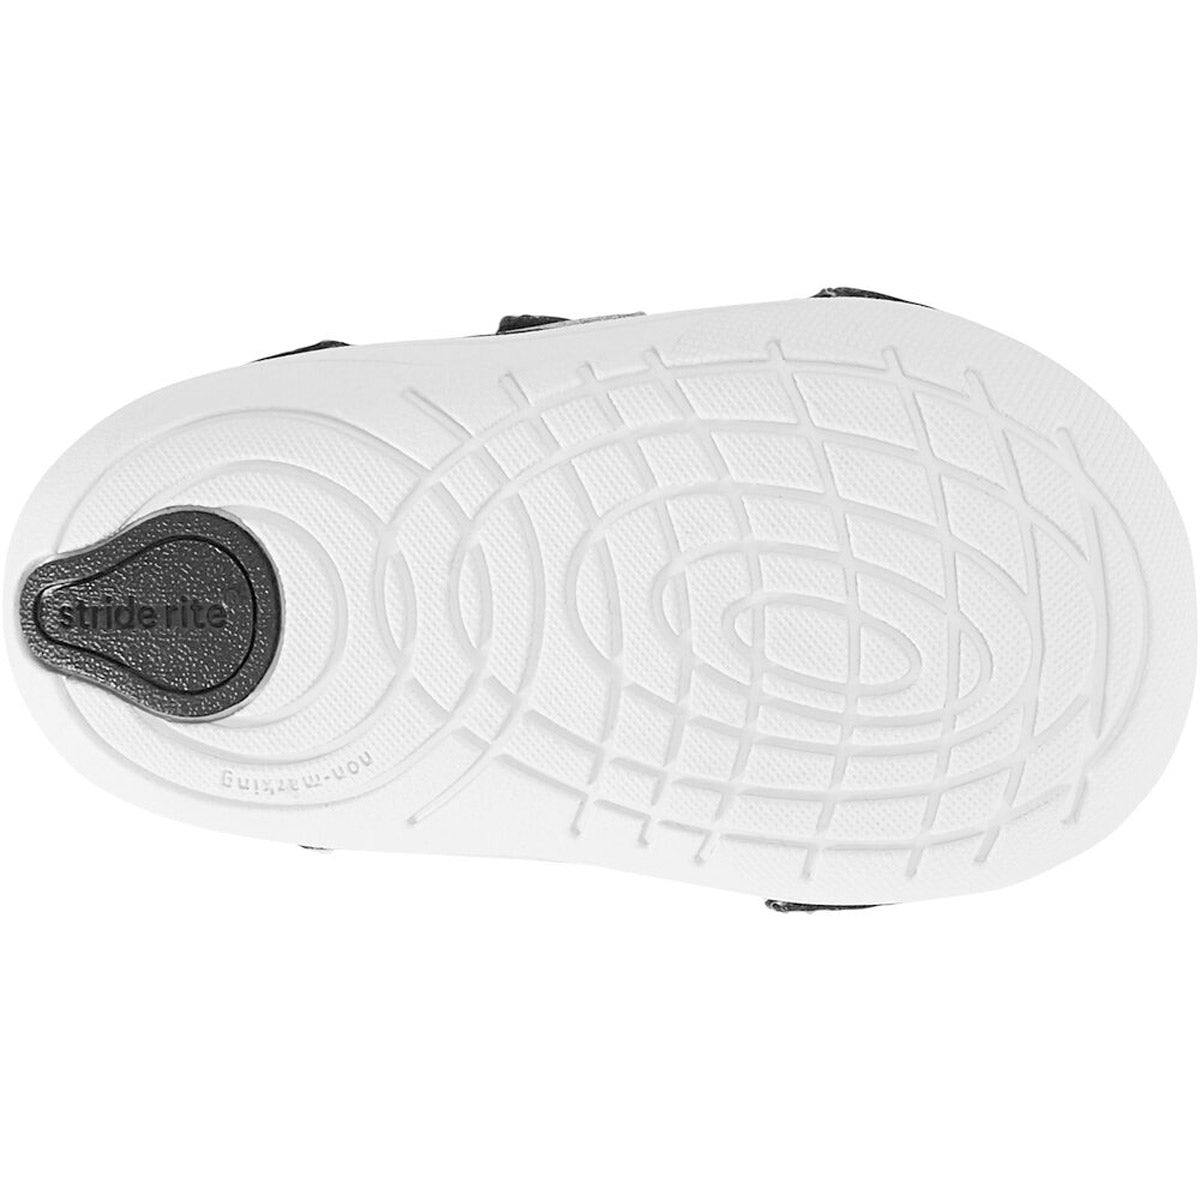 Sole of a Stride Rite kids&#39; athletic shoe with tread pattern and logo.